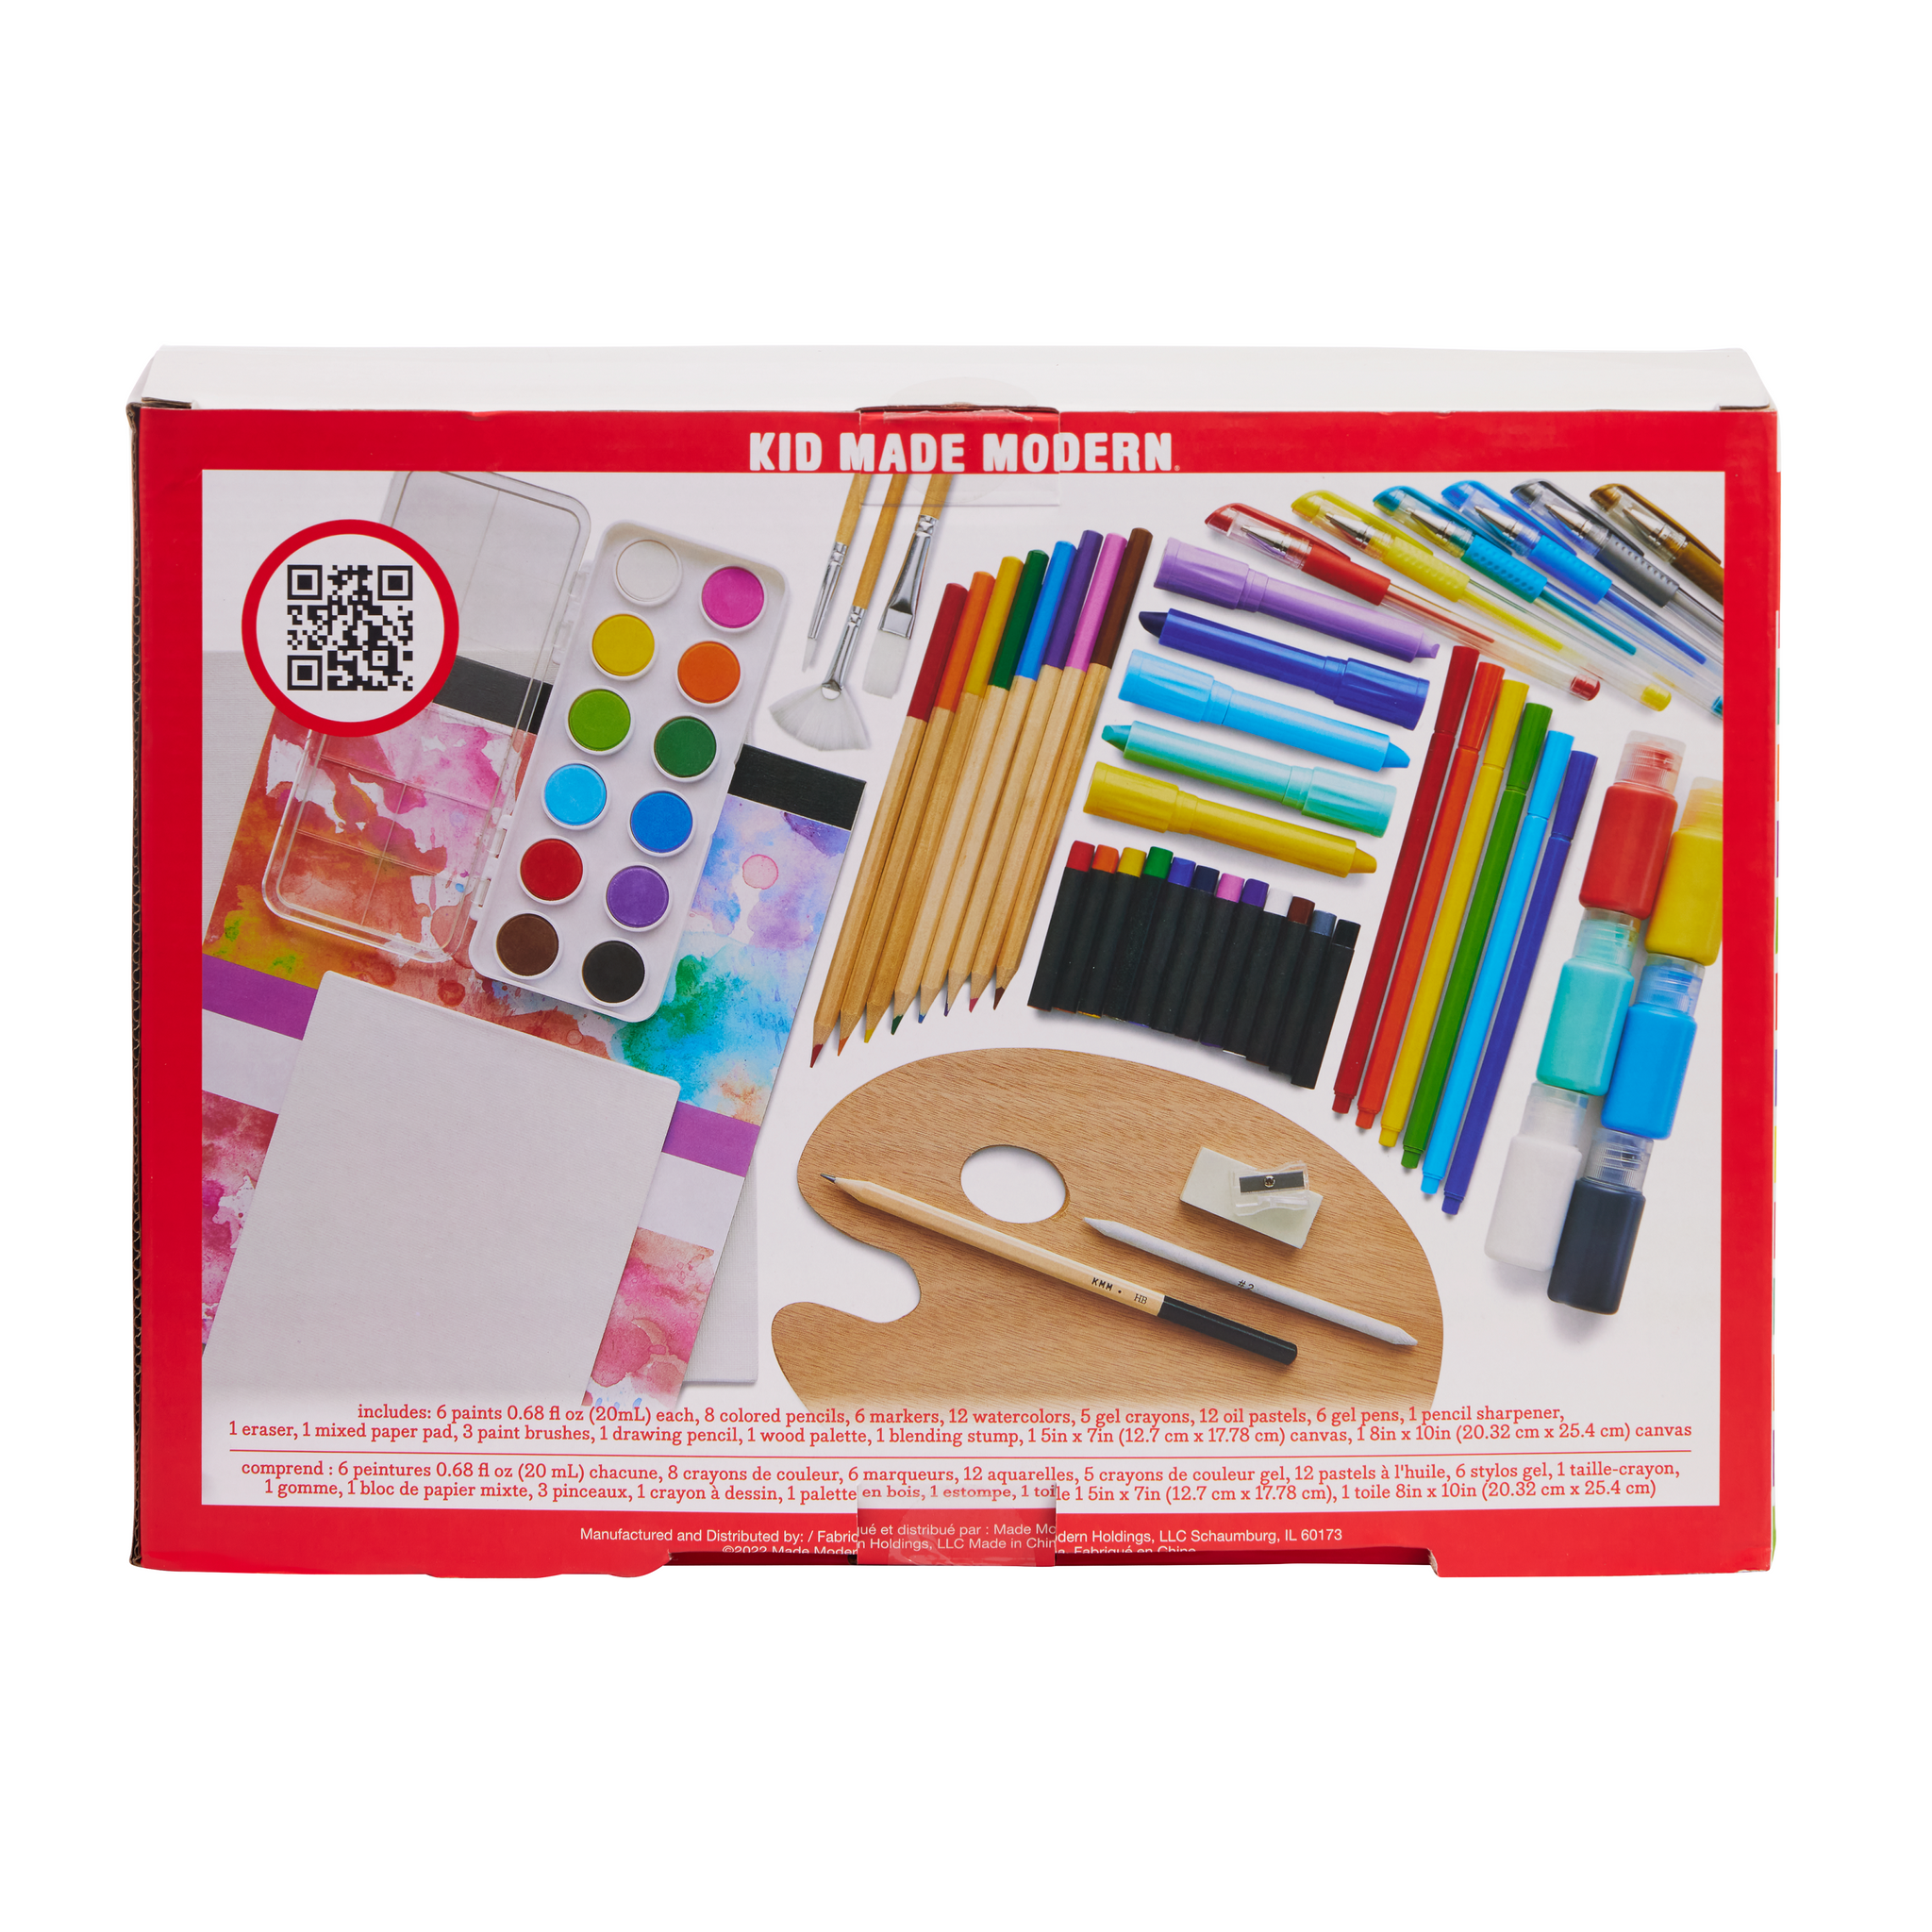 Colorful Buildings & Sea Paint-by-Number Kit by Artist's Loft